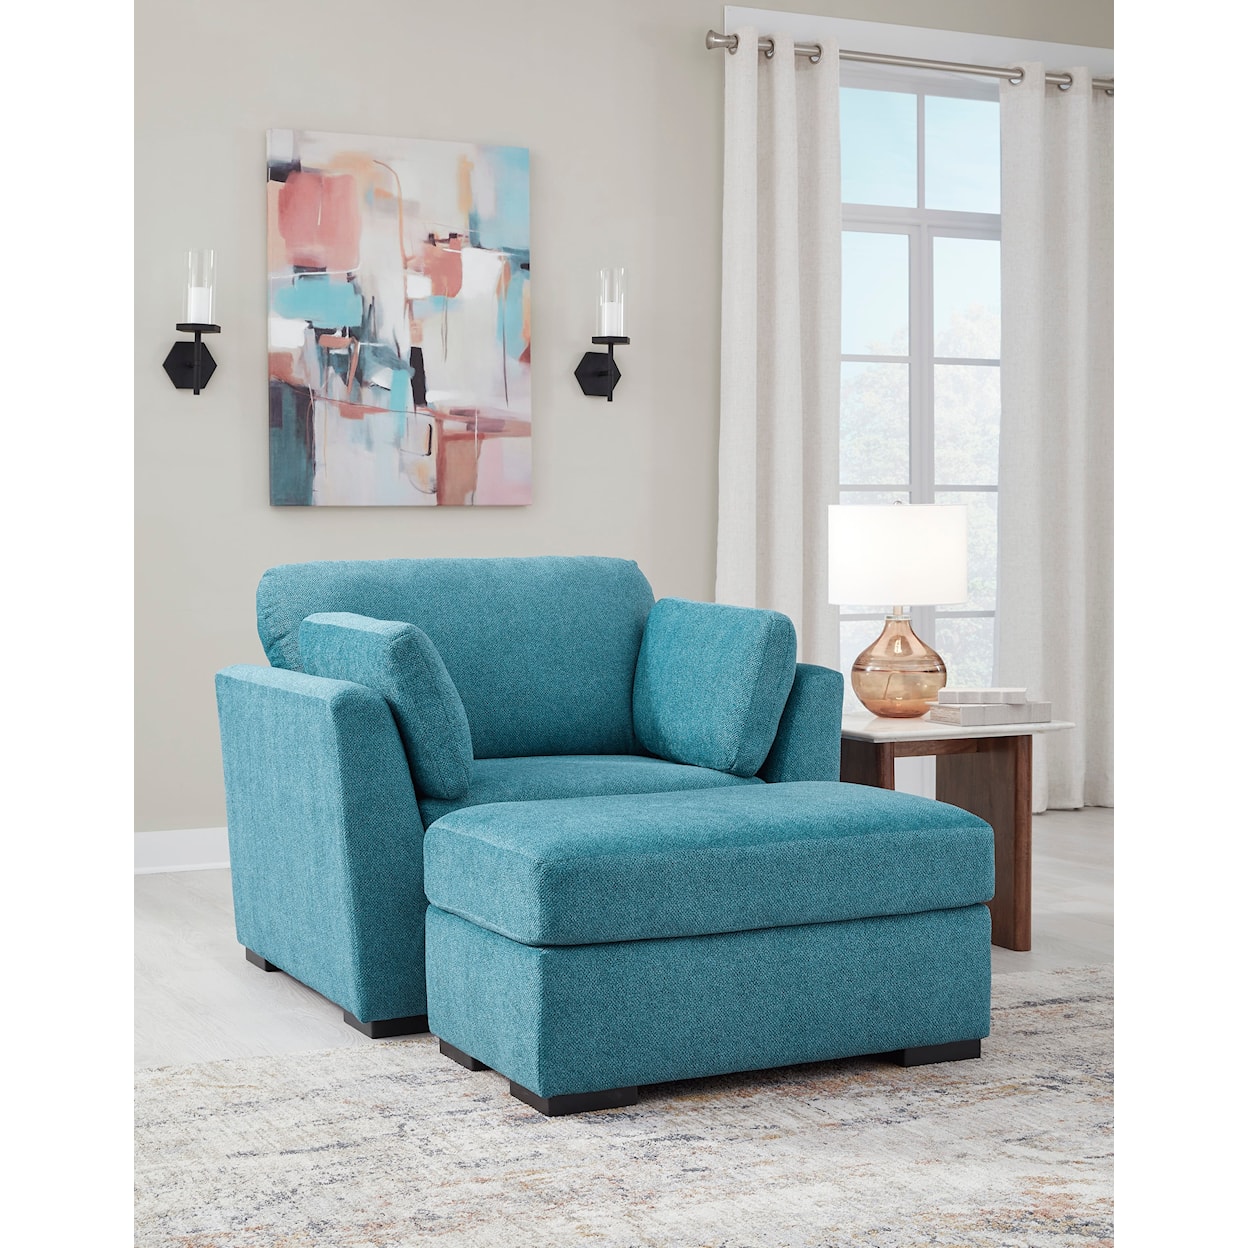 Benchcraft Keerwick Oversized Chair And Ottoman